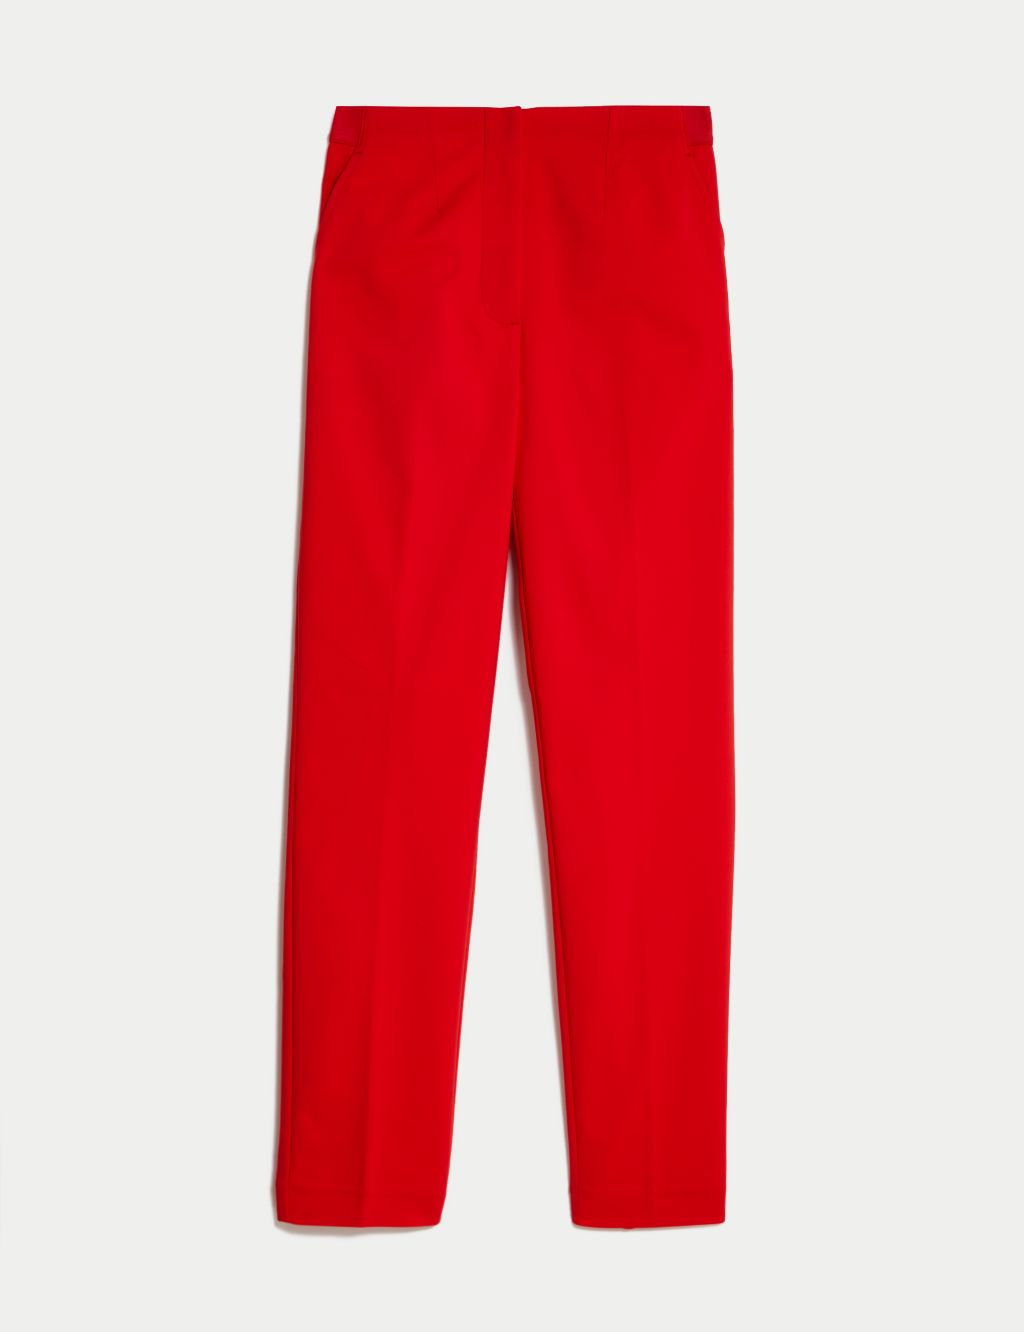 Cotton Blend Slim Fit Ankle Grazer Trousers | M&S Collection | M&S